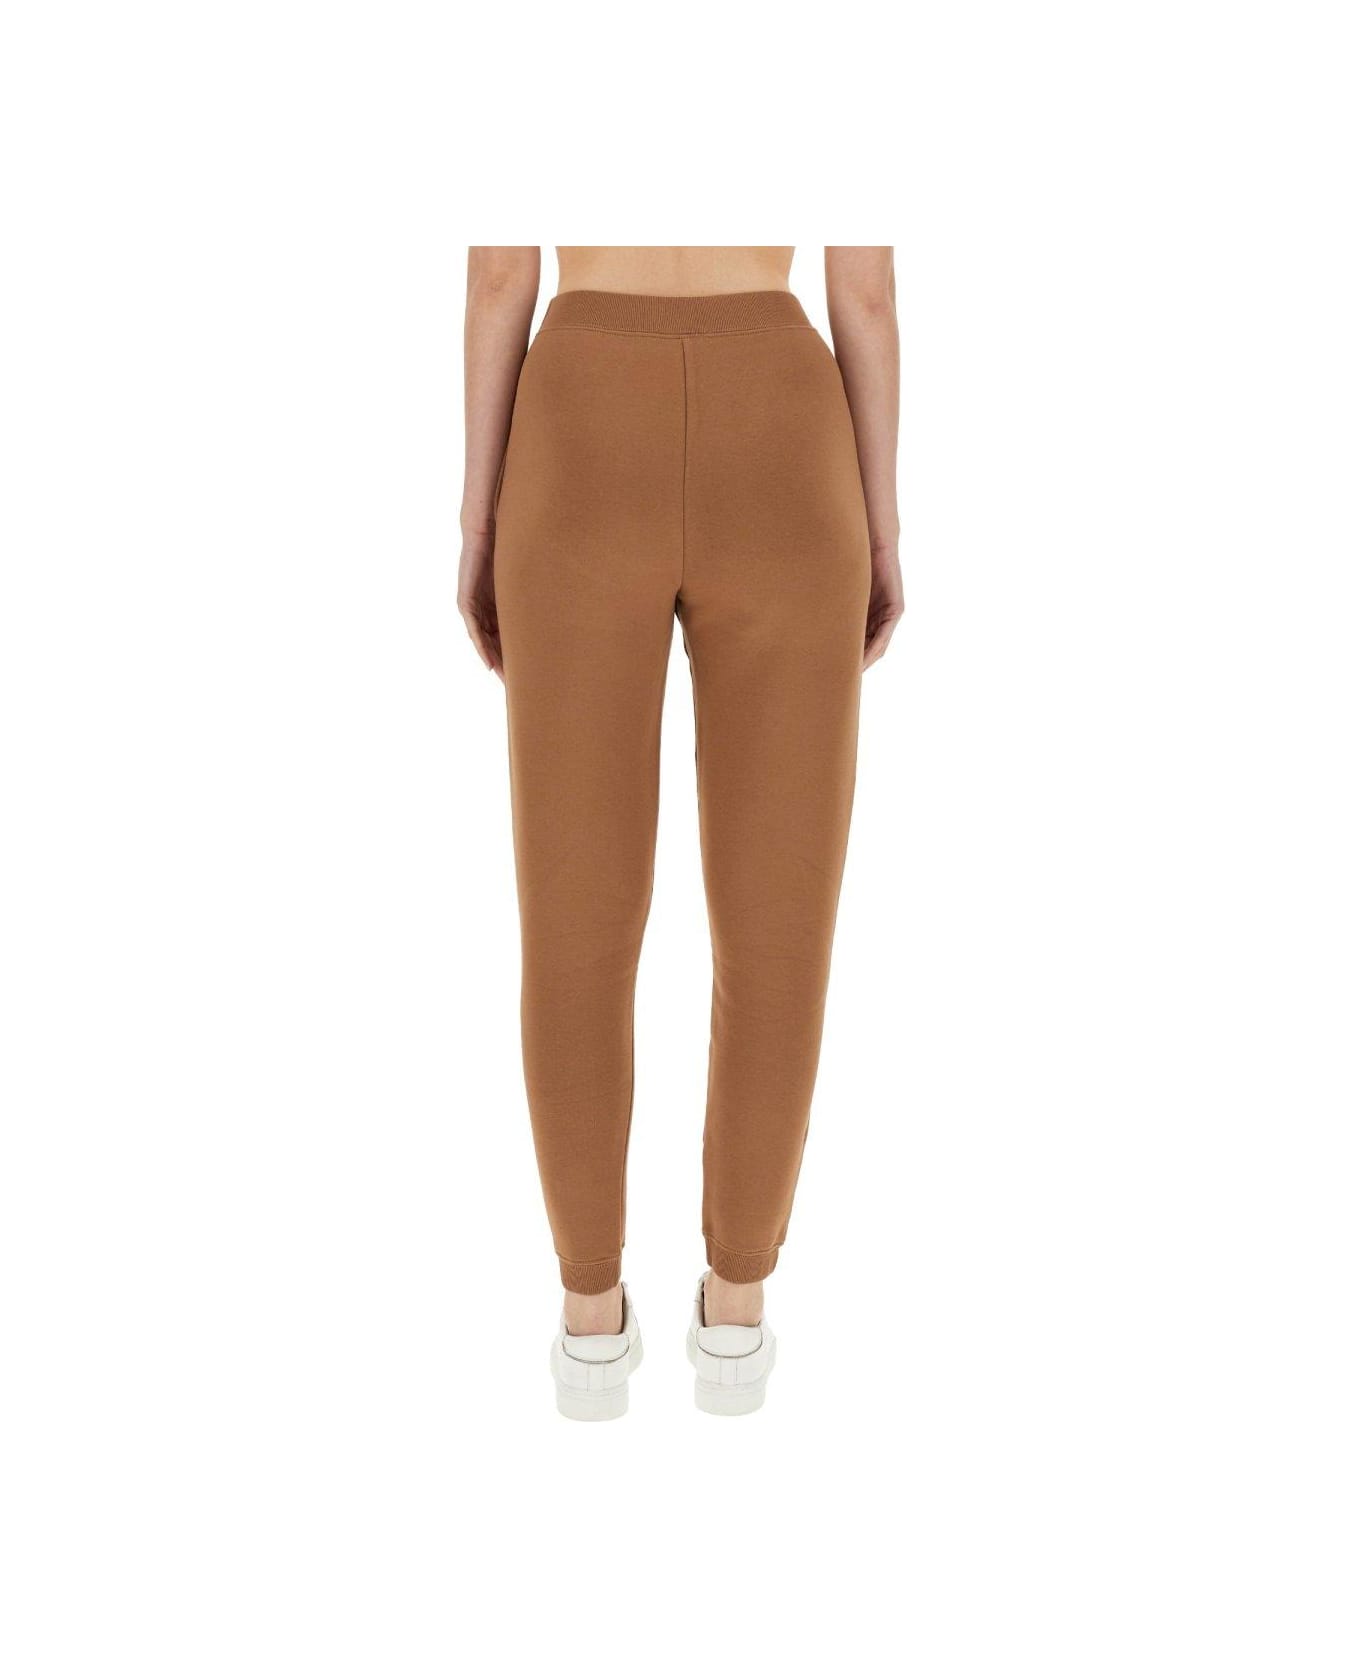 'S Max Mara Logo Embroidered Jogging Trousers - BEIGE